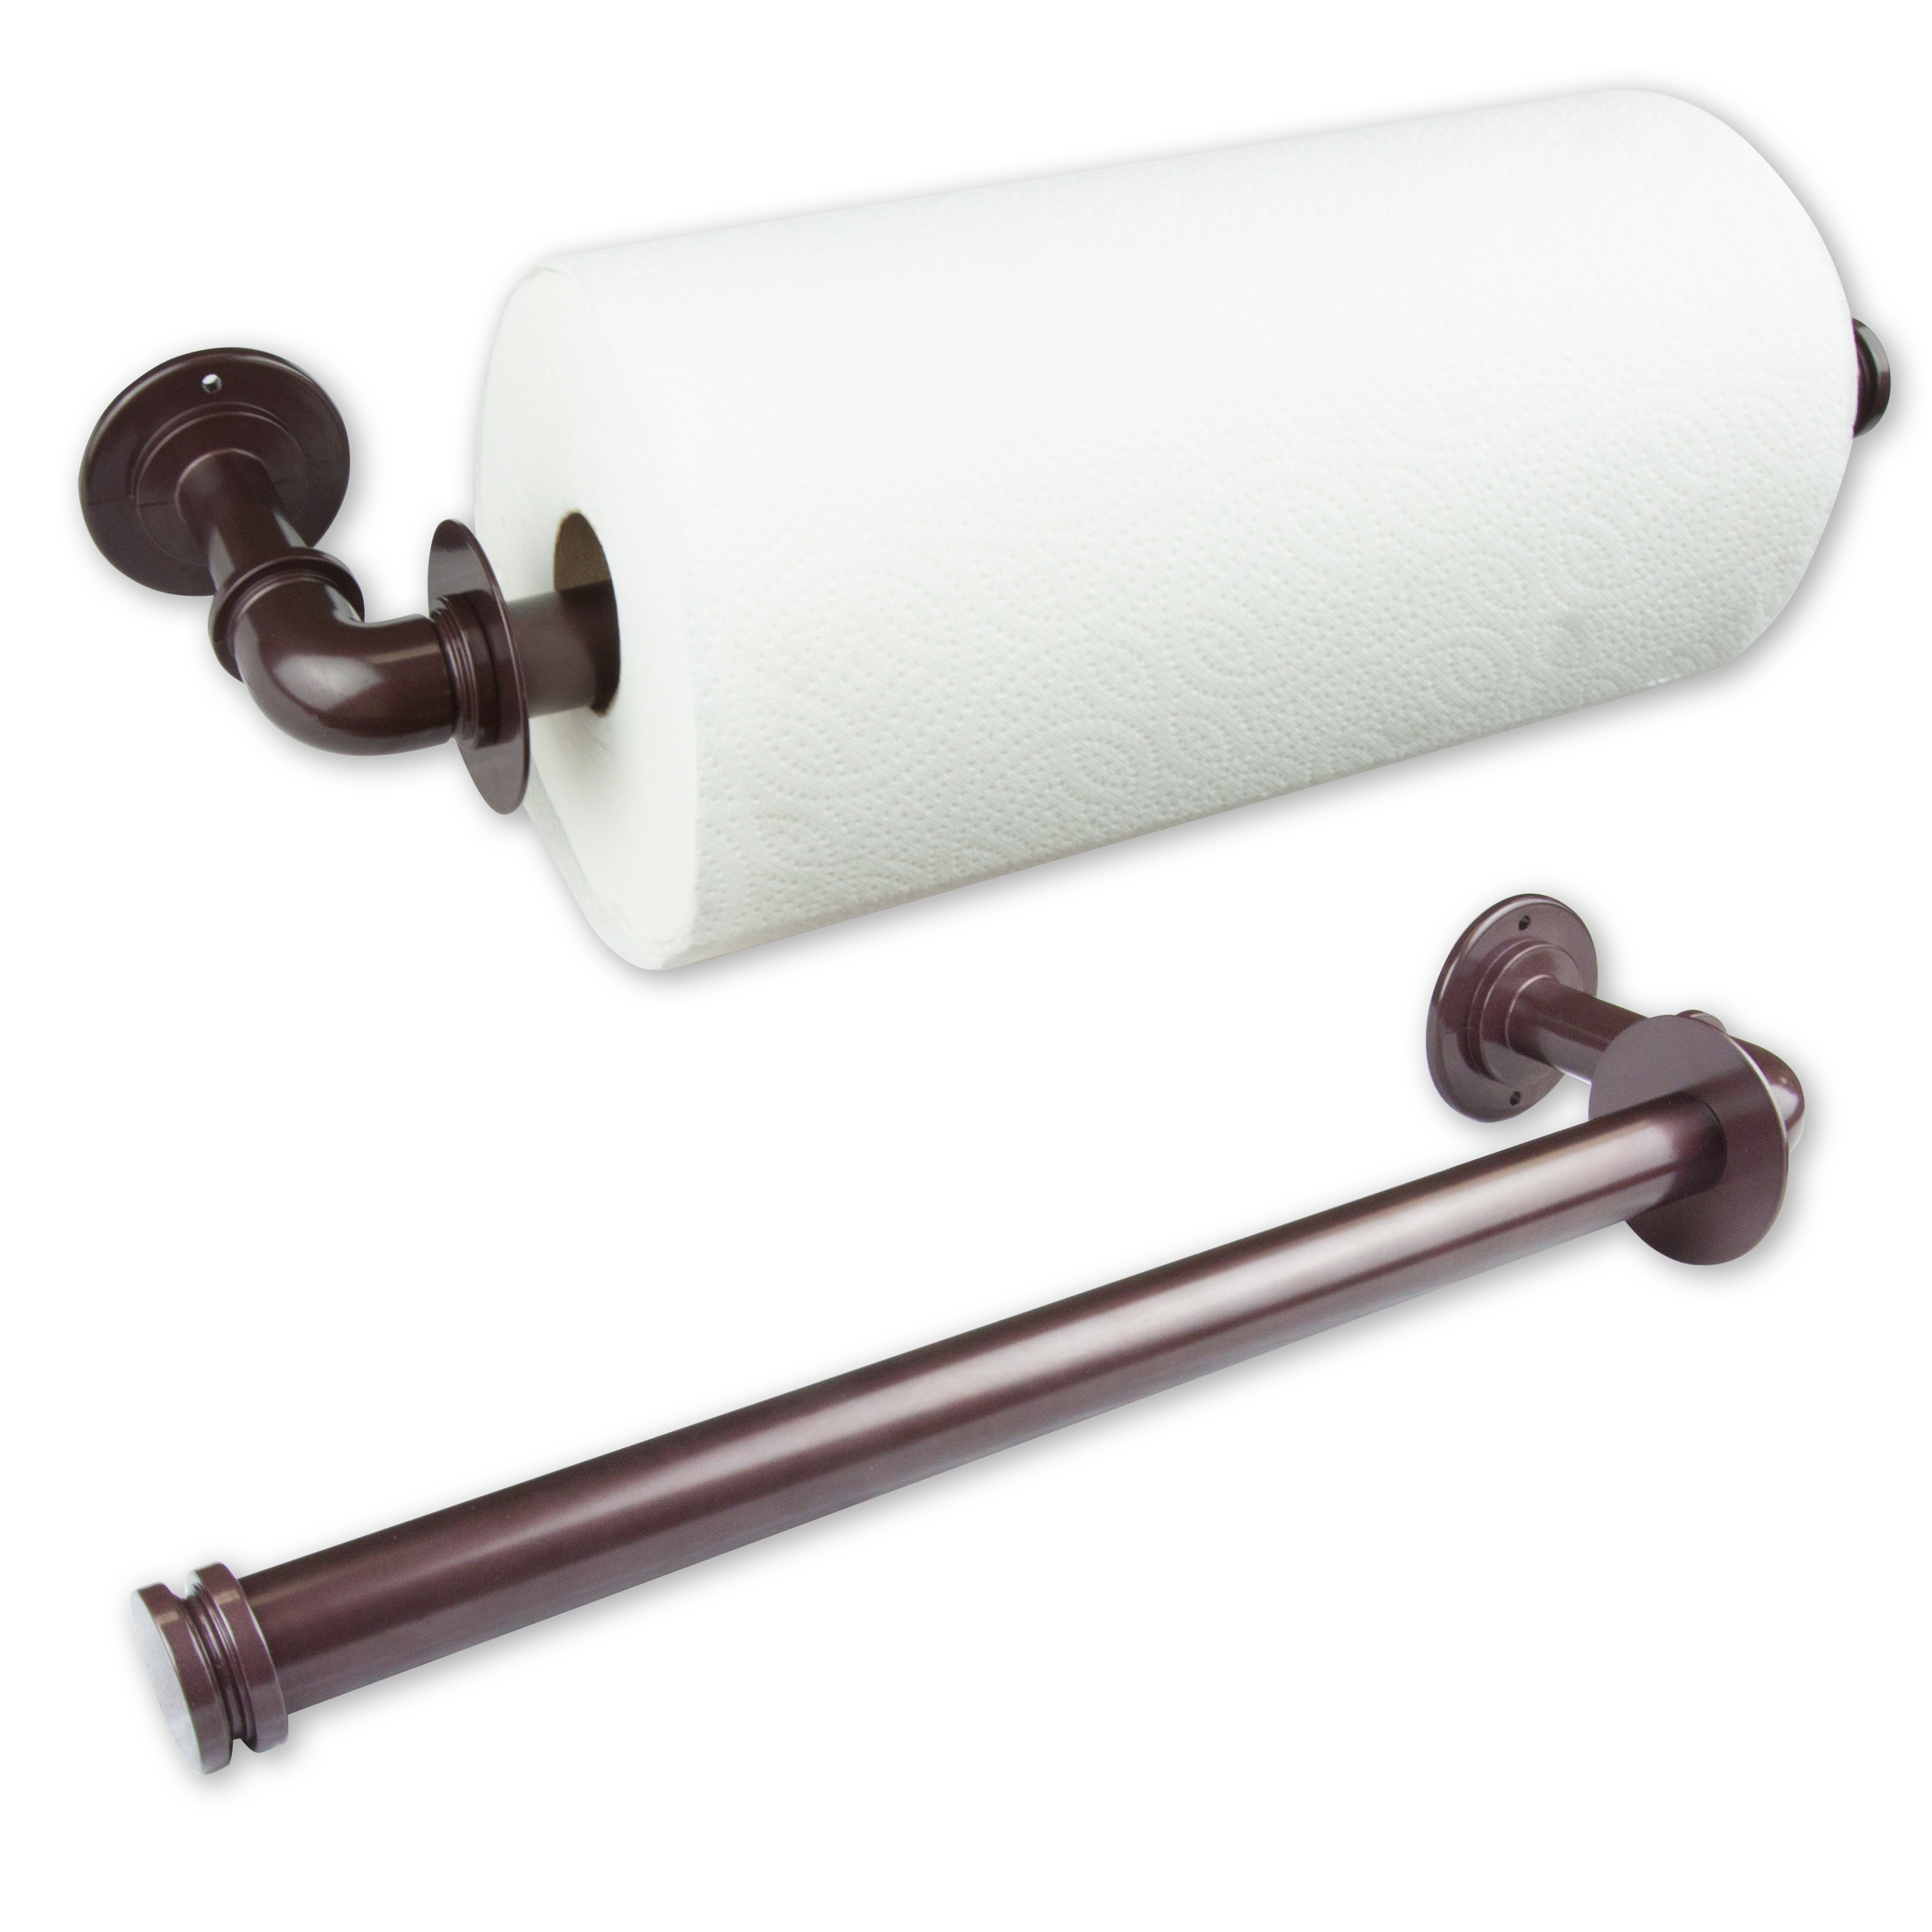 https://ak1.ostkcdn.com/images/products/is/images/direct/78e7eb85ef500c3c8447ecee545d7537b589ce18/InStyleDesign-Industrial-Pipe-Design-Triple-Toilet-Paper-Storage--Single-Kitchen-Towel-Holder.jpg